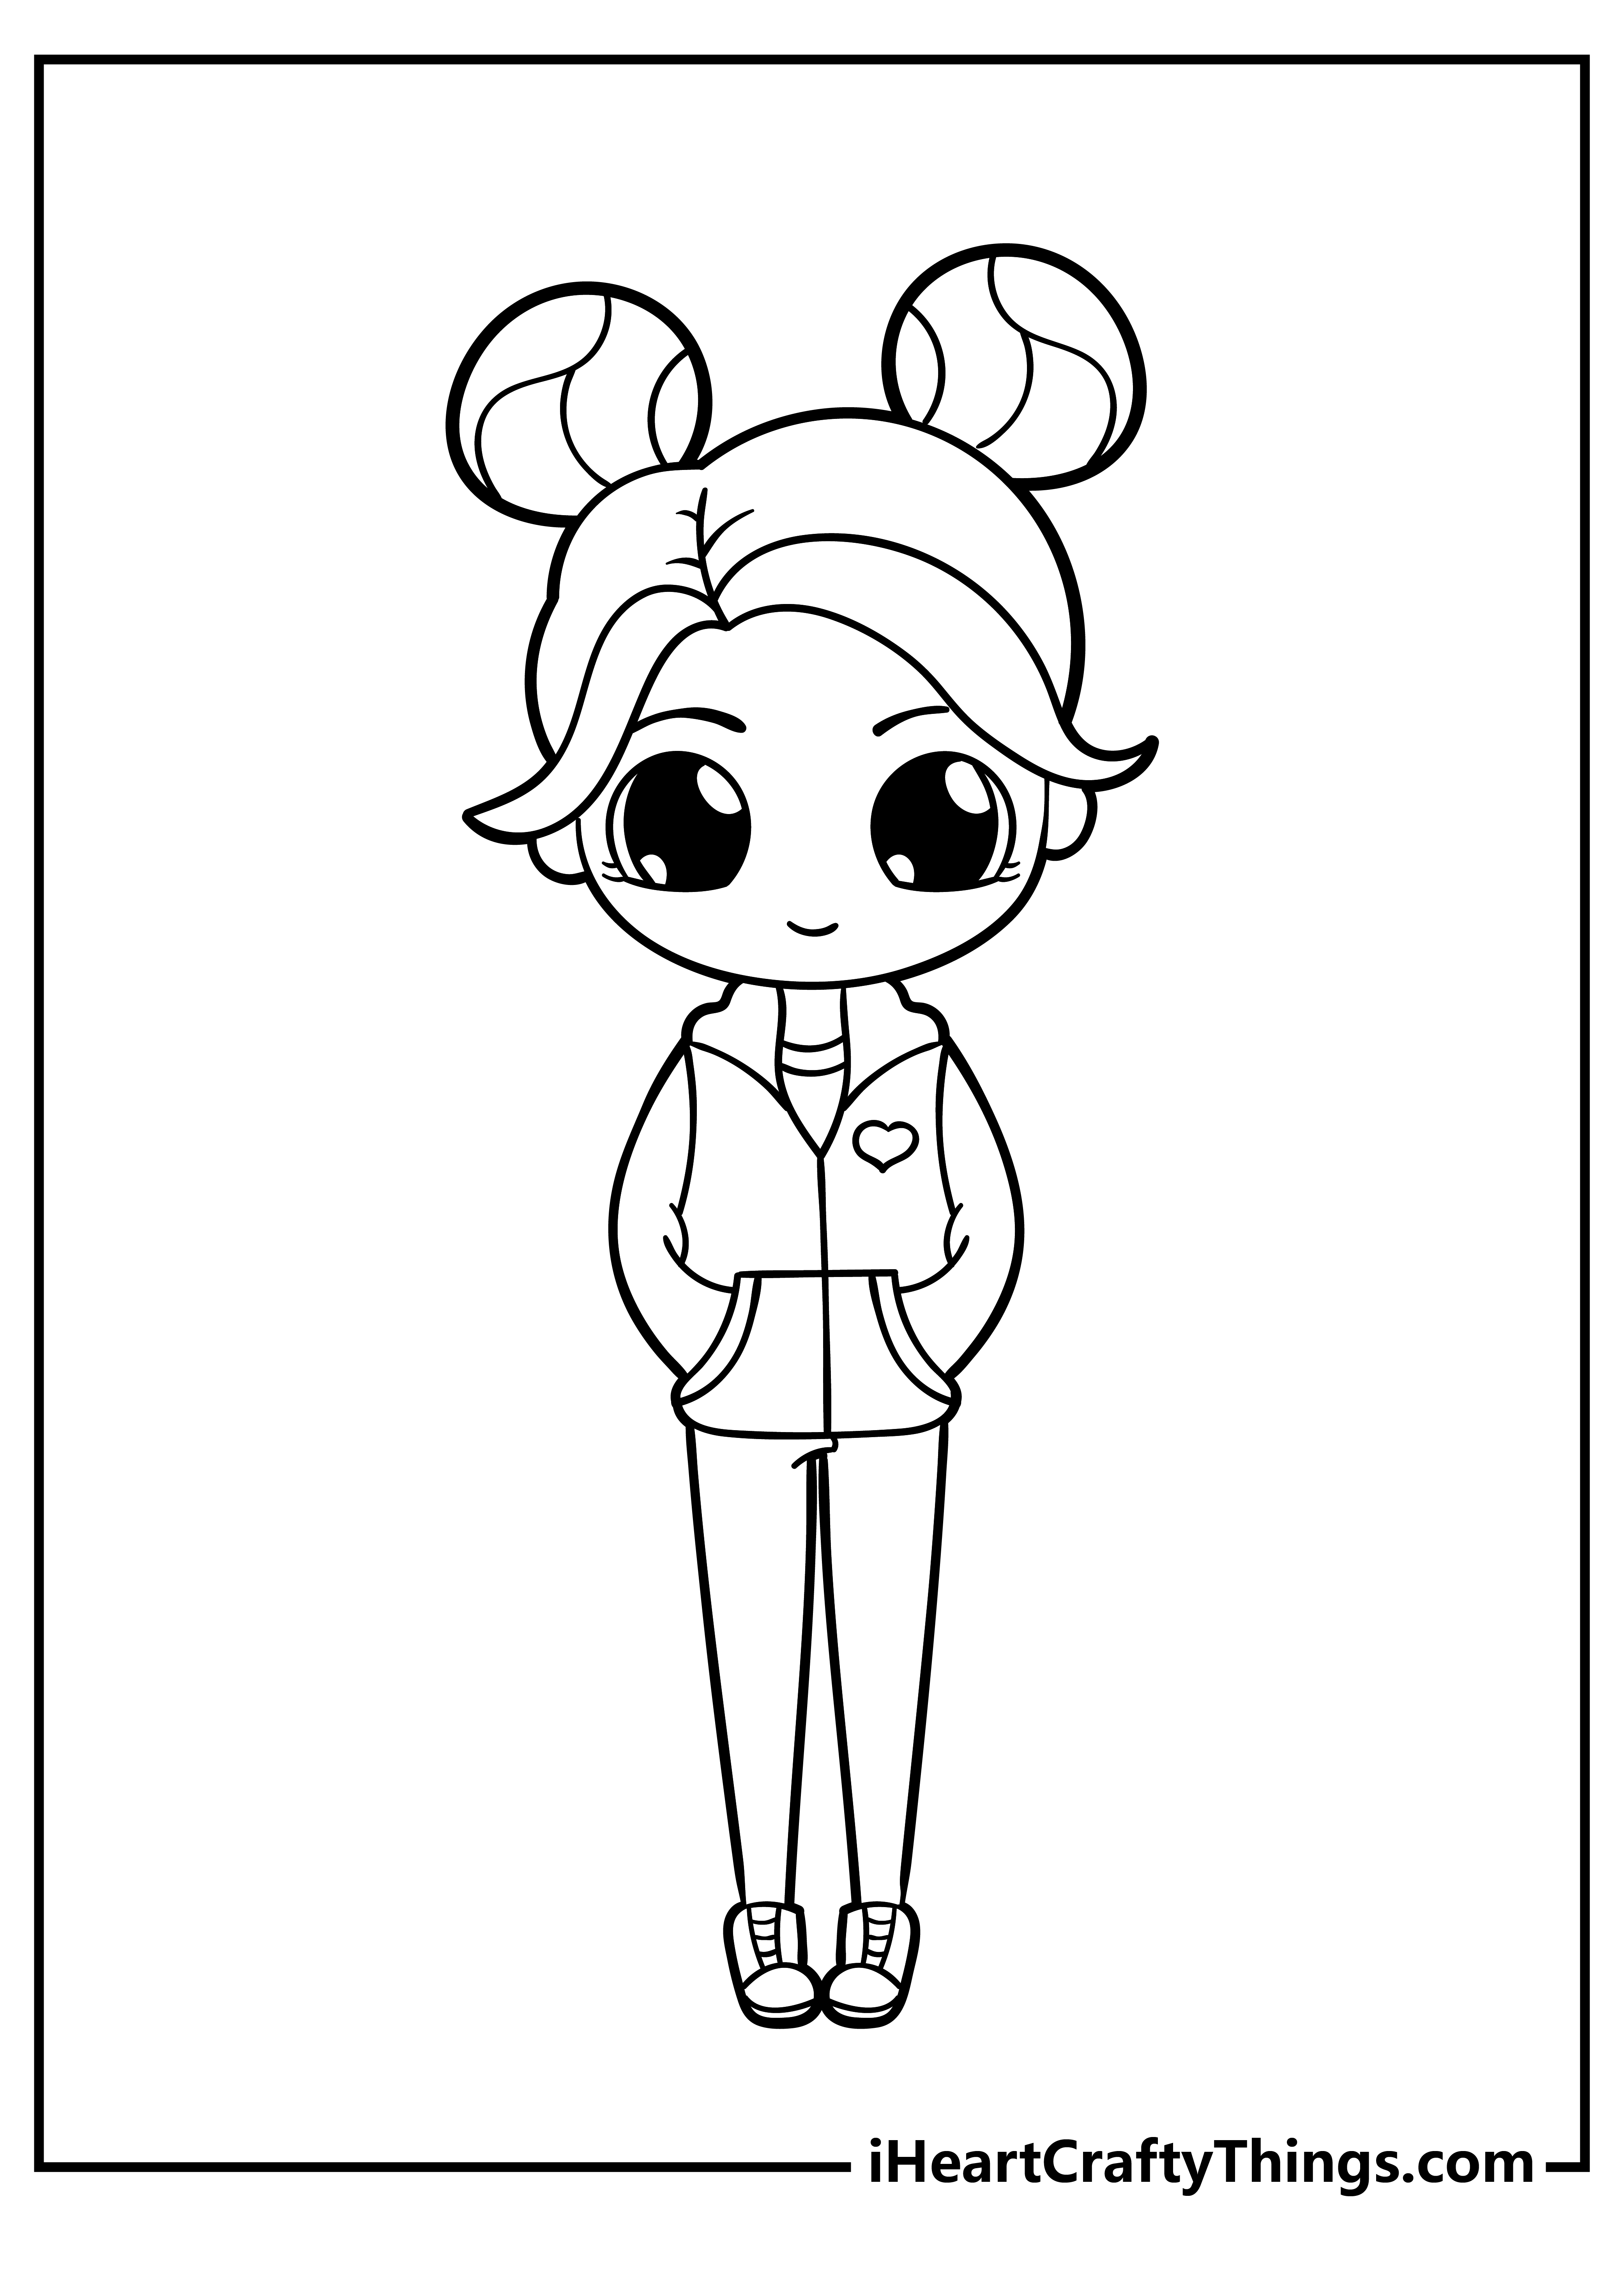 Printable Cute Coloring Pages For Girls Updated 21